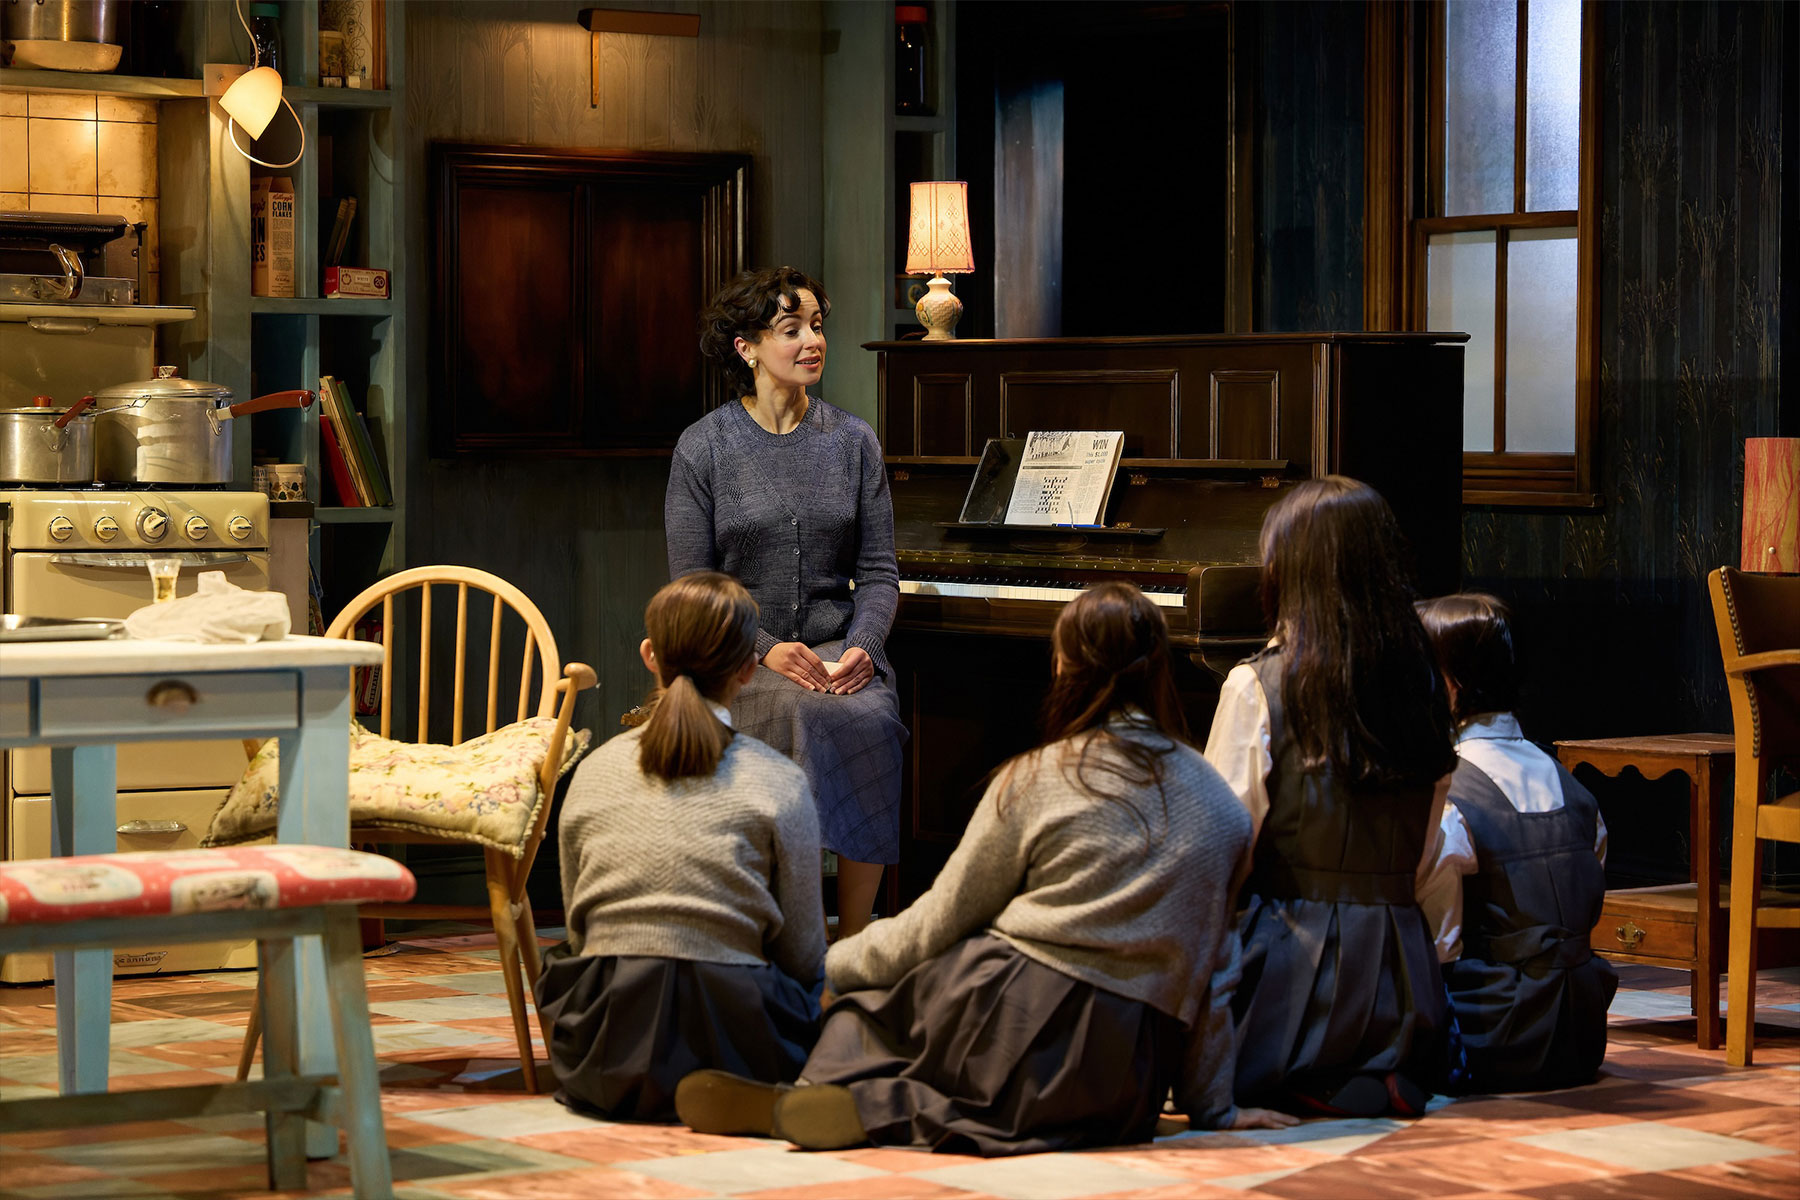 Laura Donnelly with Nicola Turner, Nancy Allsop, Lara McDonnell and Sophia Ally in a scene from The Hills of California at the Harold Pinter Theatre